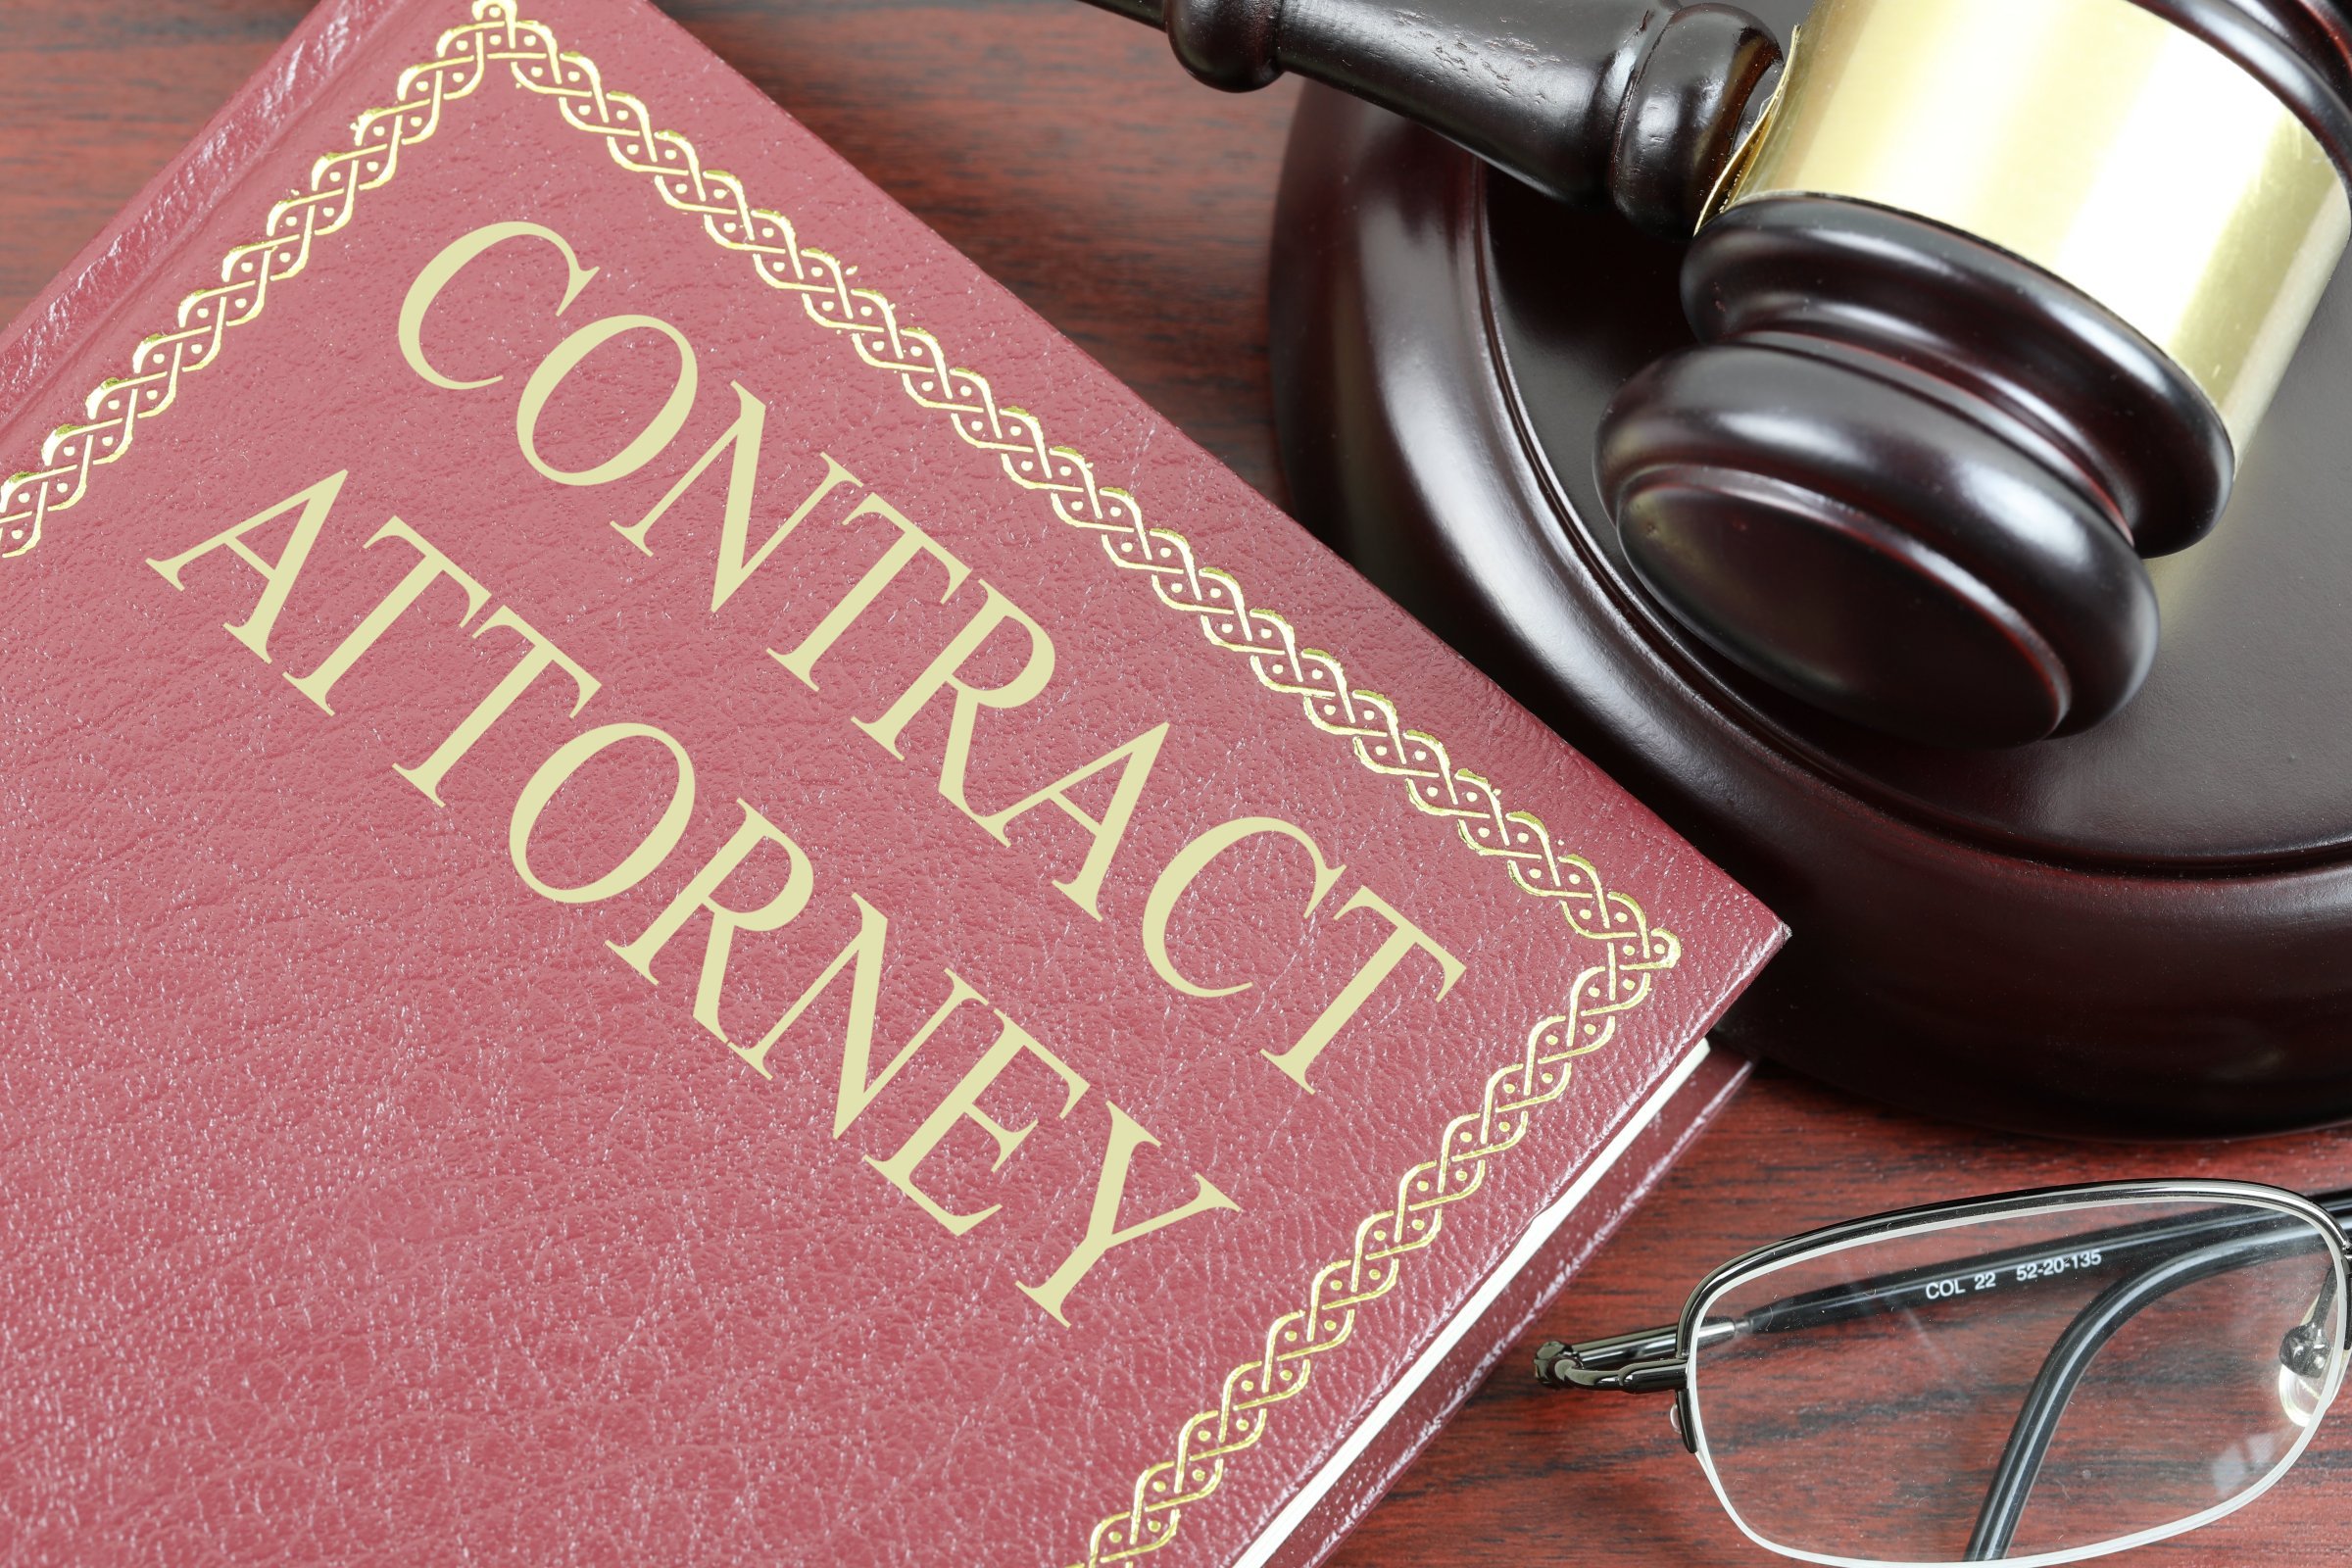 contract attorney